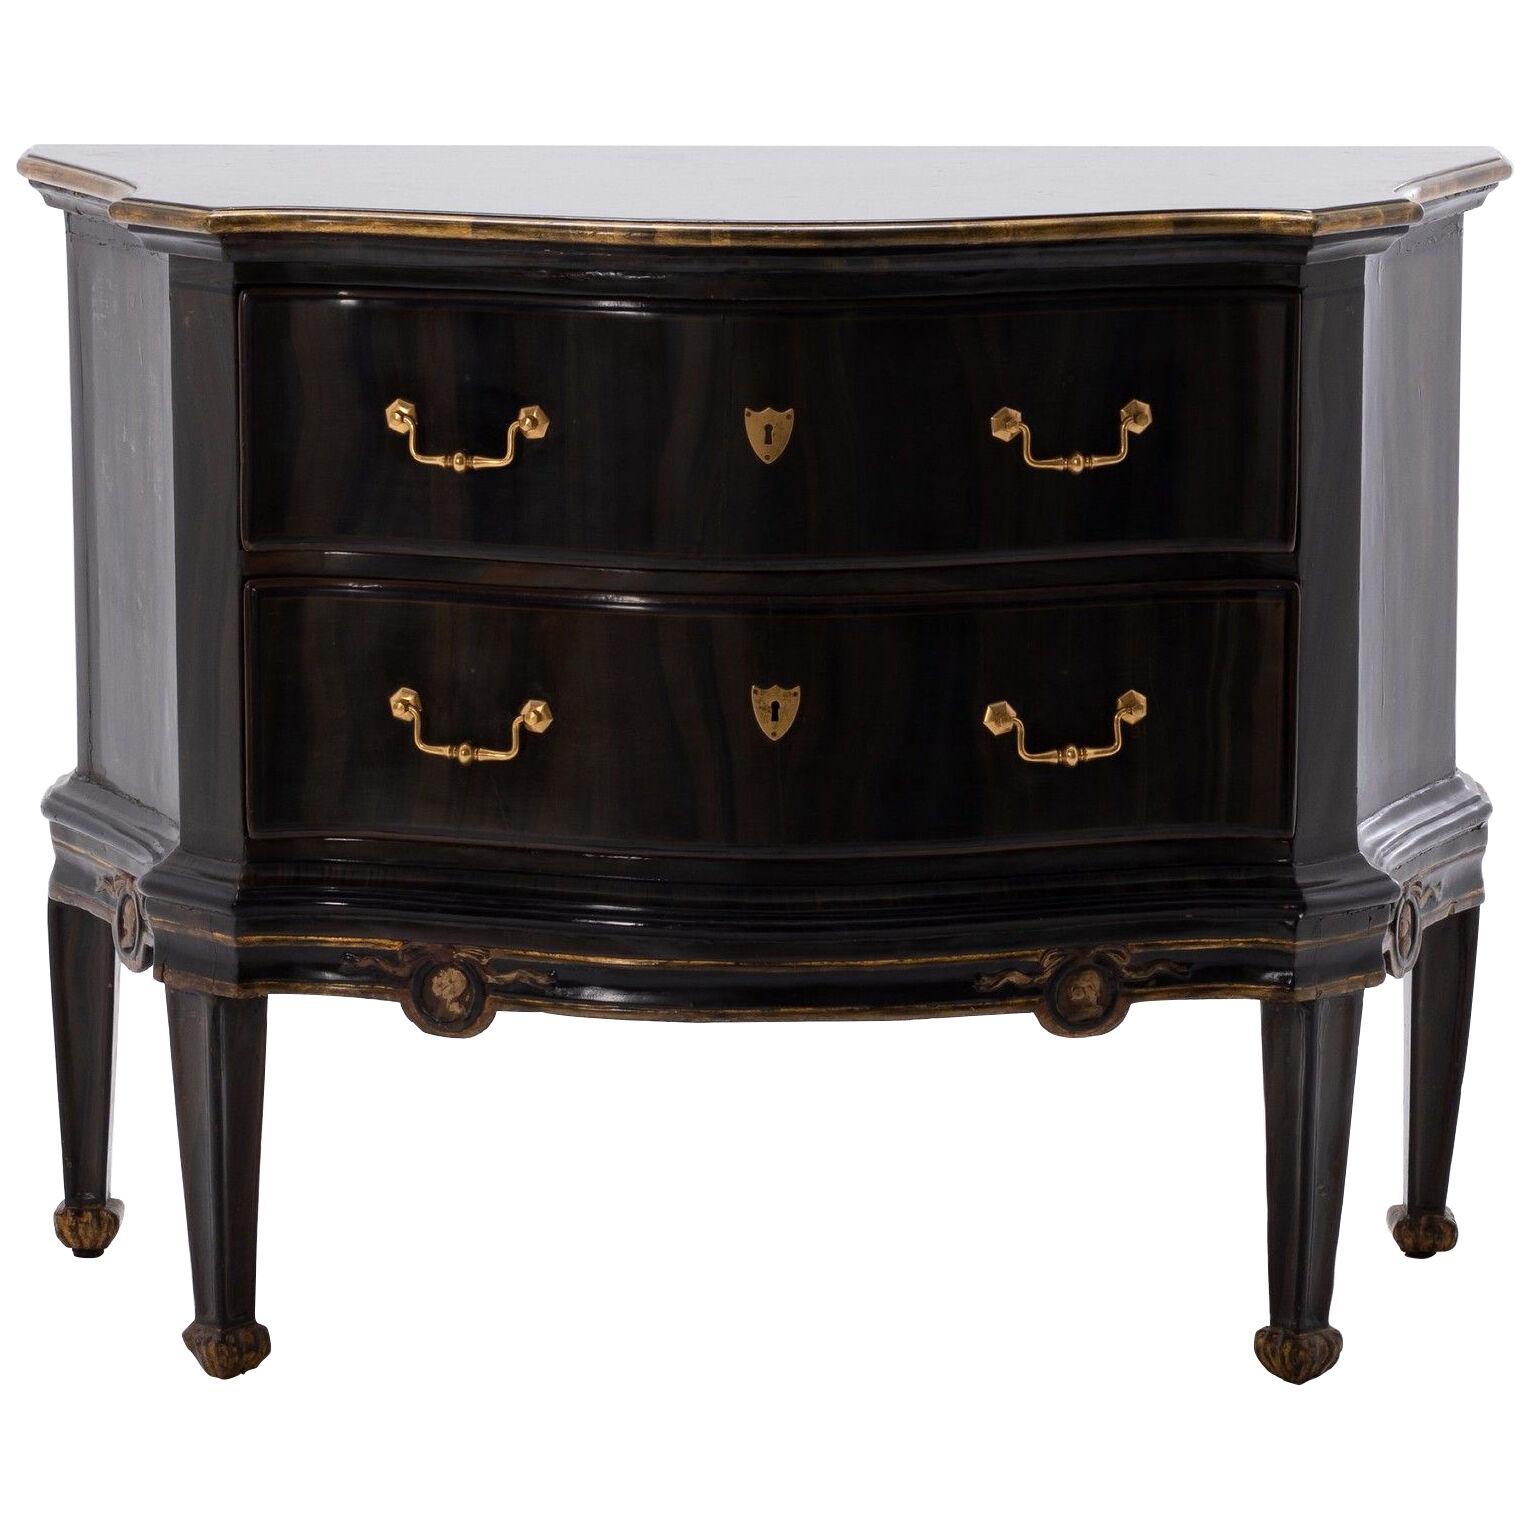 Early 19th Century Italian Painted Commode